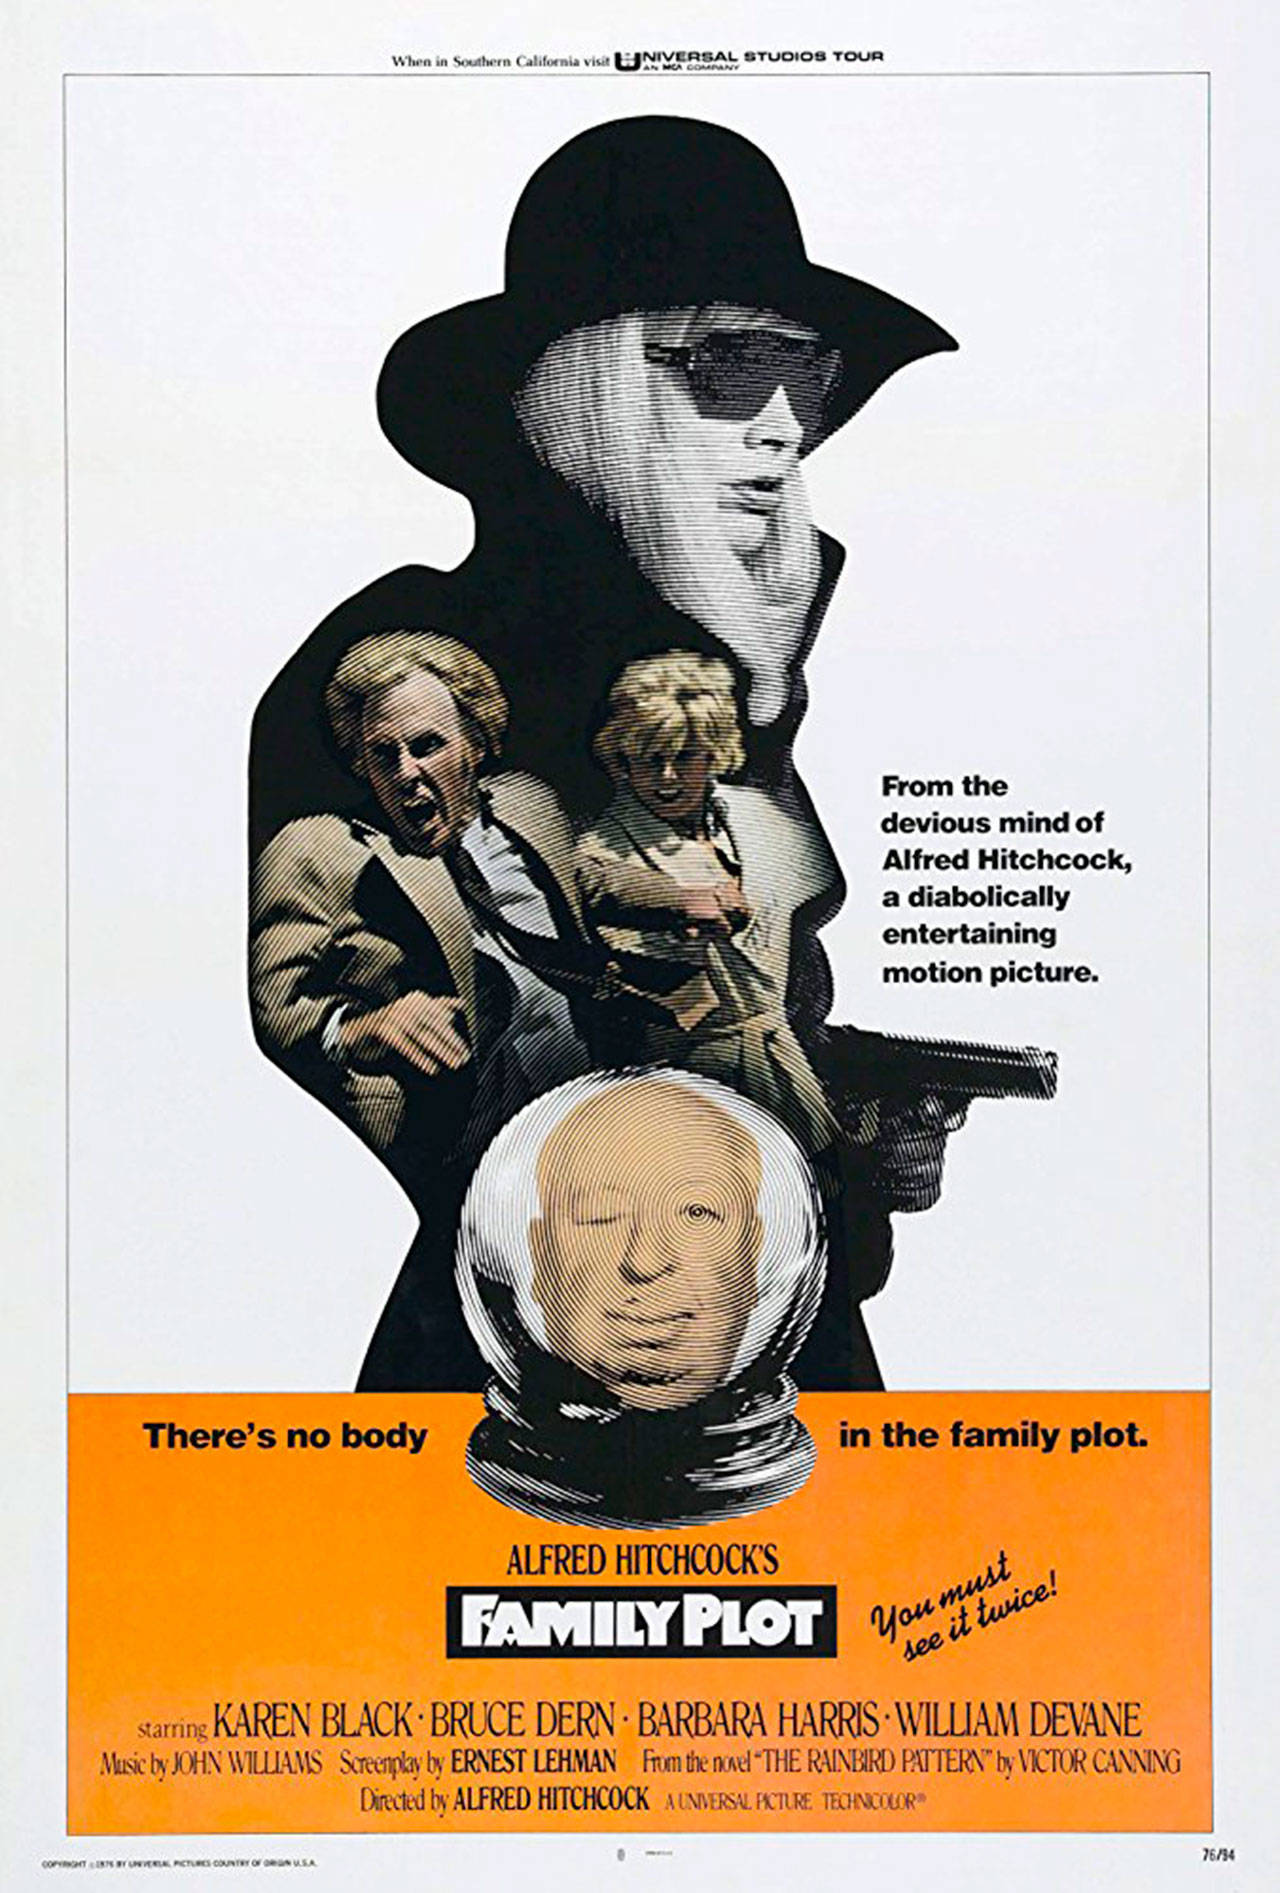 Image courtesy of Universal Pictures | The Island Film Group will meet for a movie at 7 p.m. Wednesday, March 14 at the Bainbridge Public Library to screen “Family Plot” (1976).